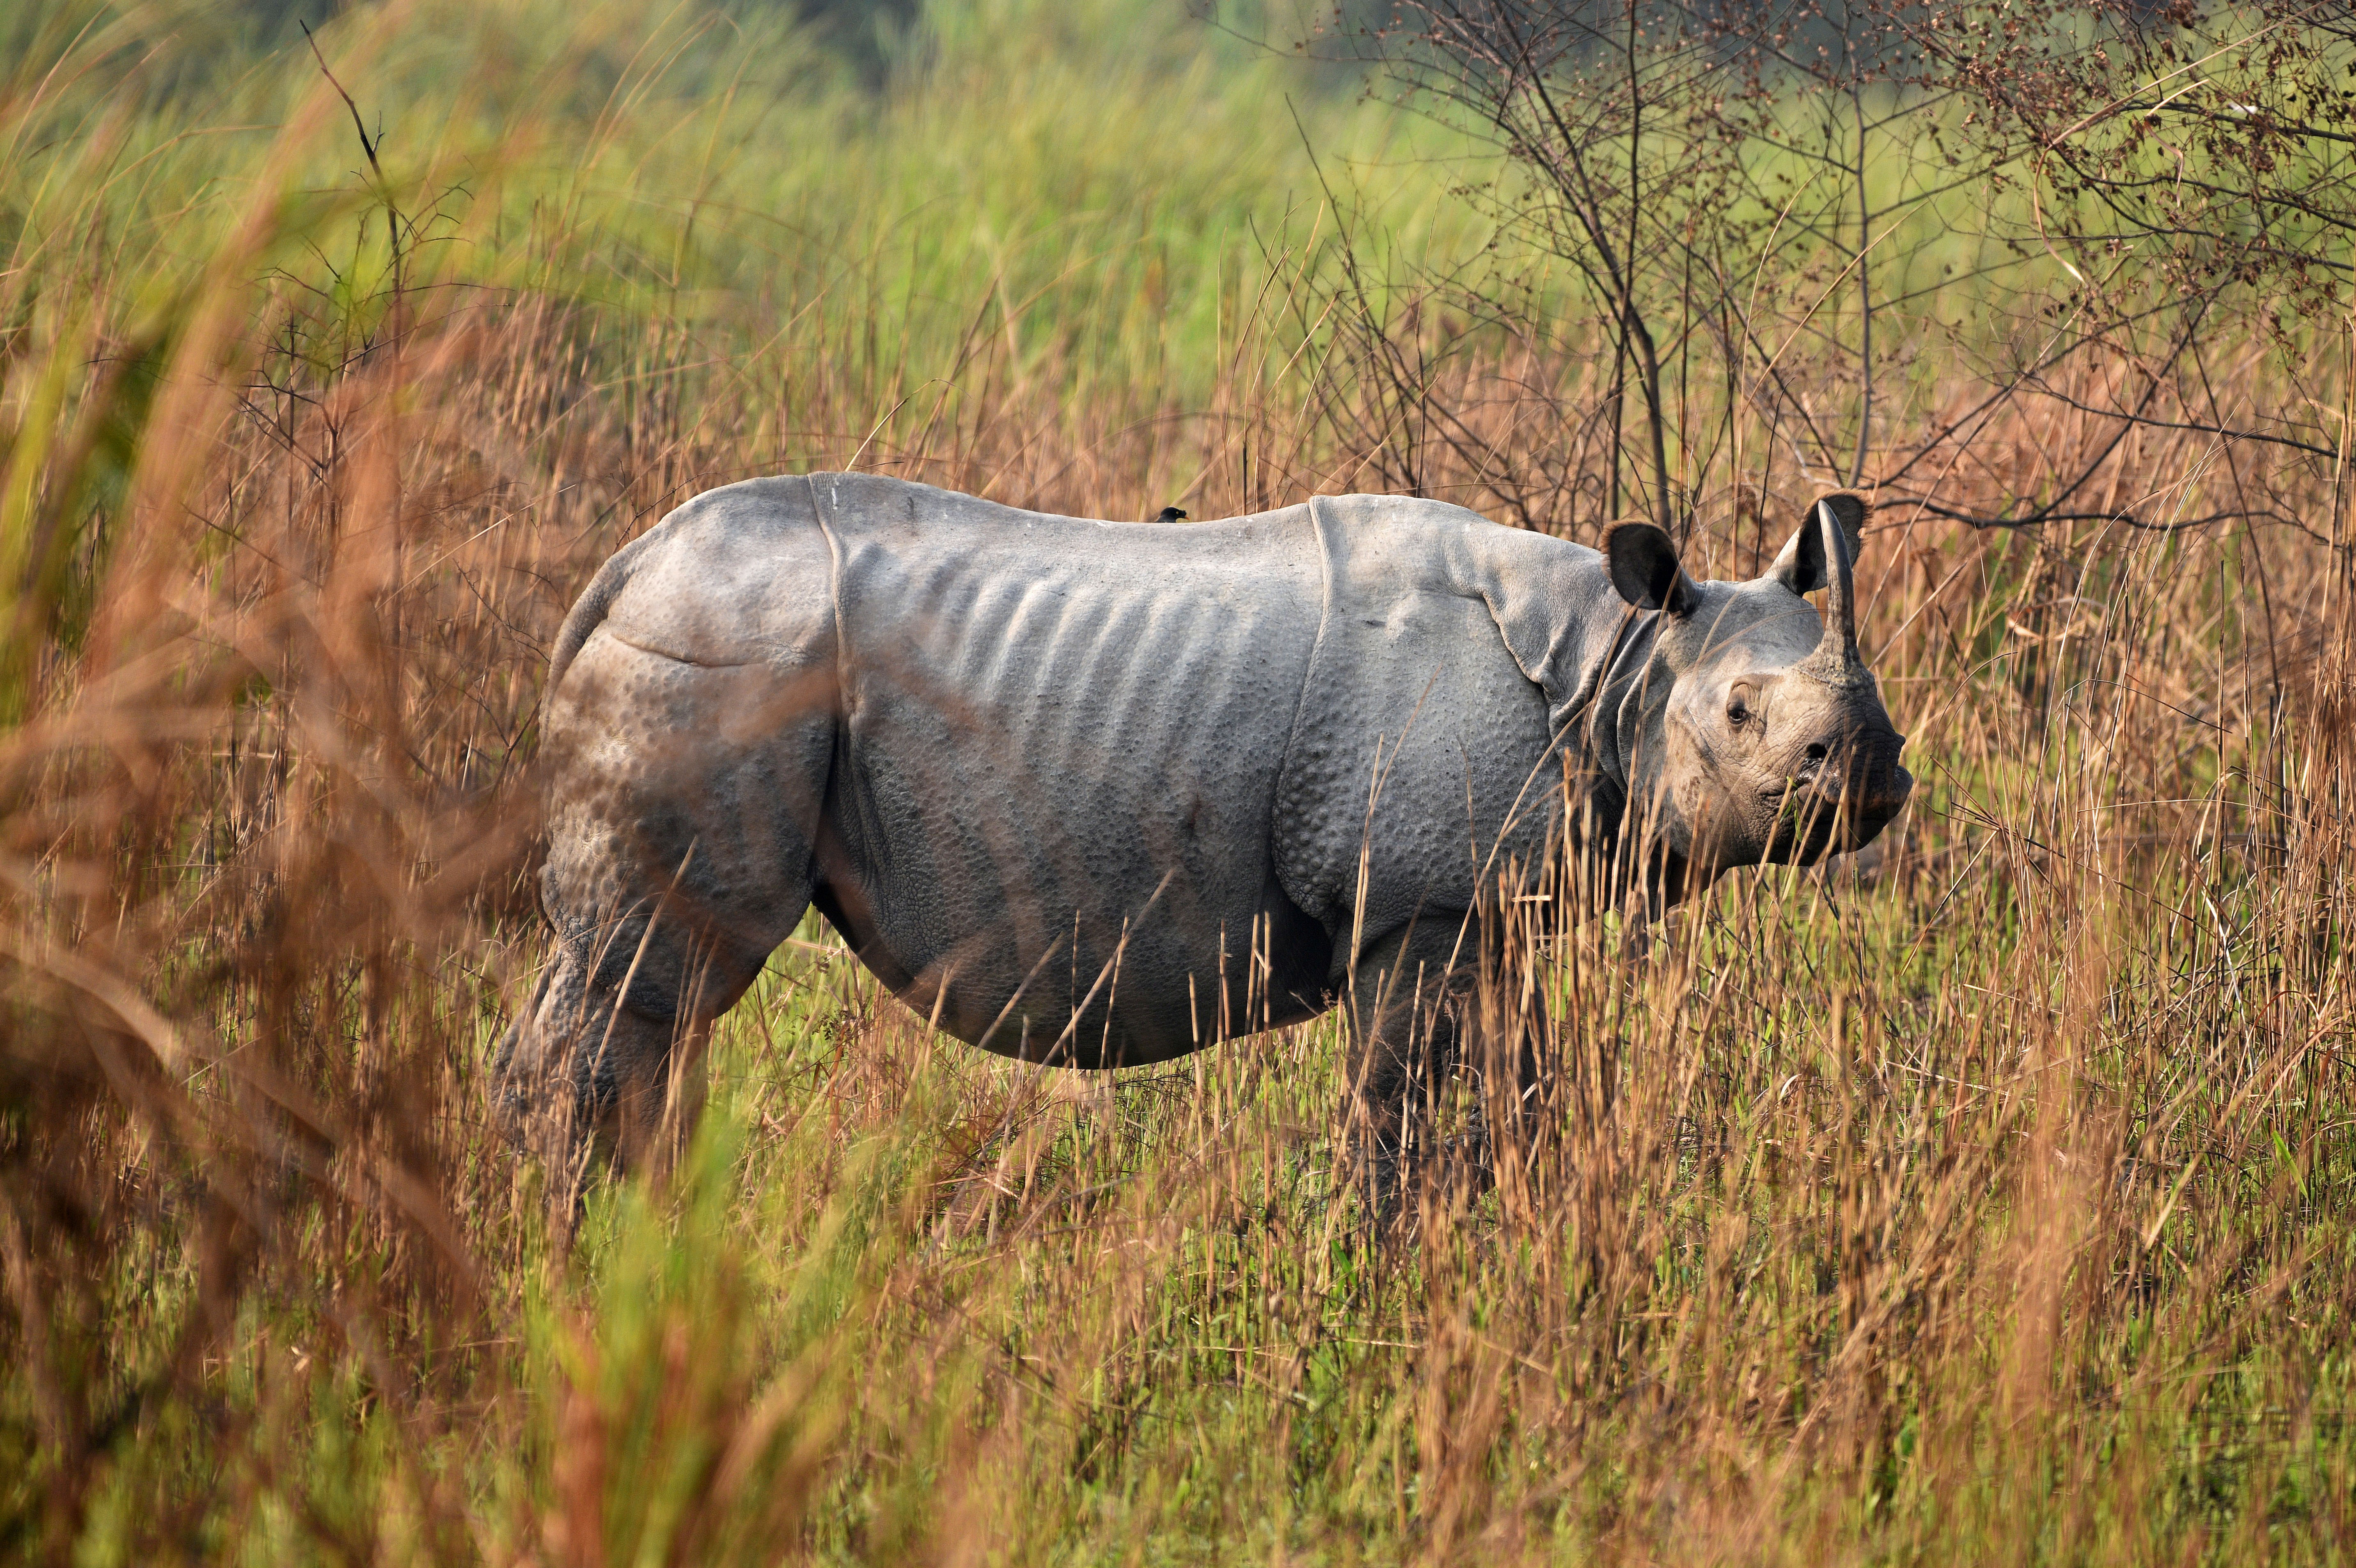 A one-horned rhinoceros is seen during a rhino census at the Kaziranga National Park